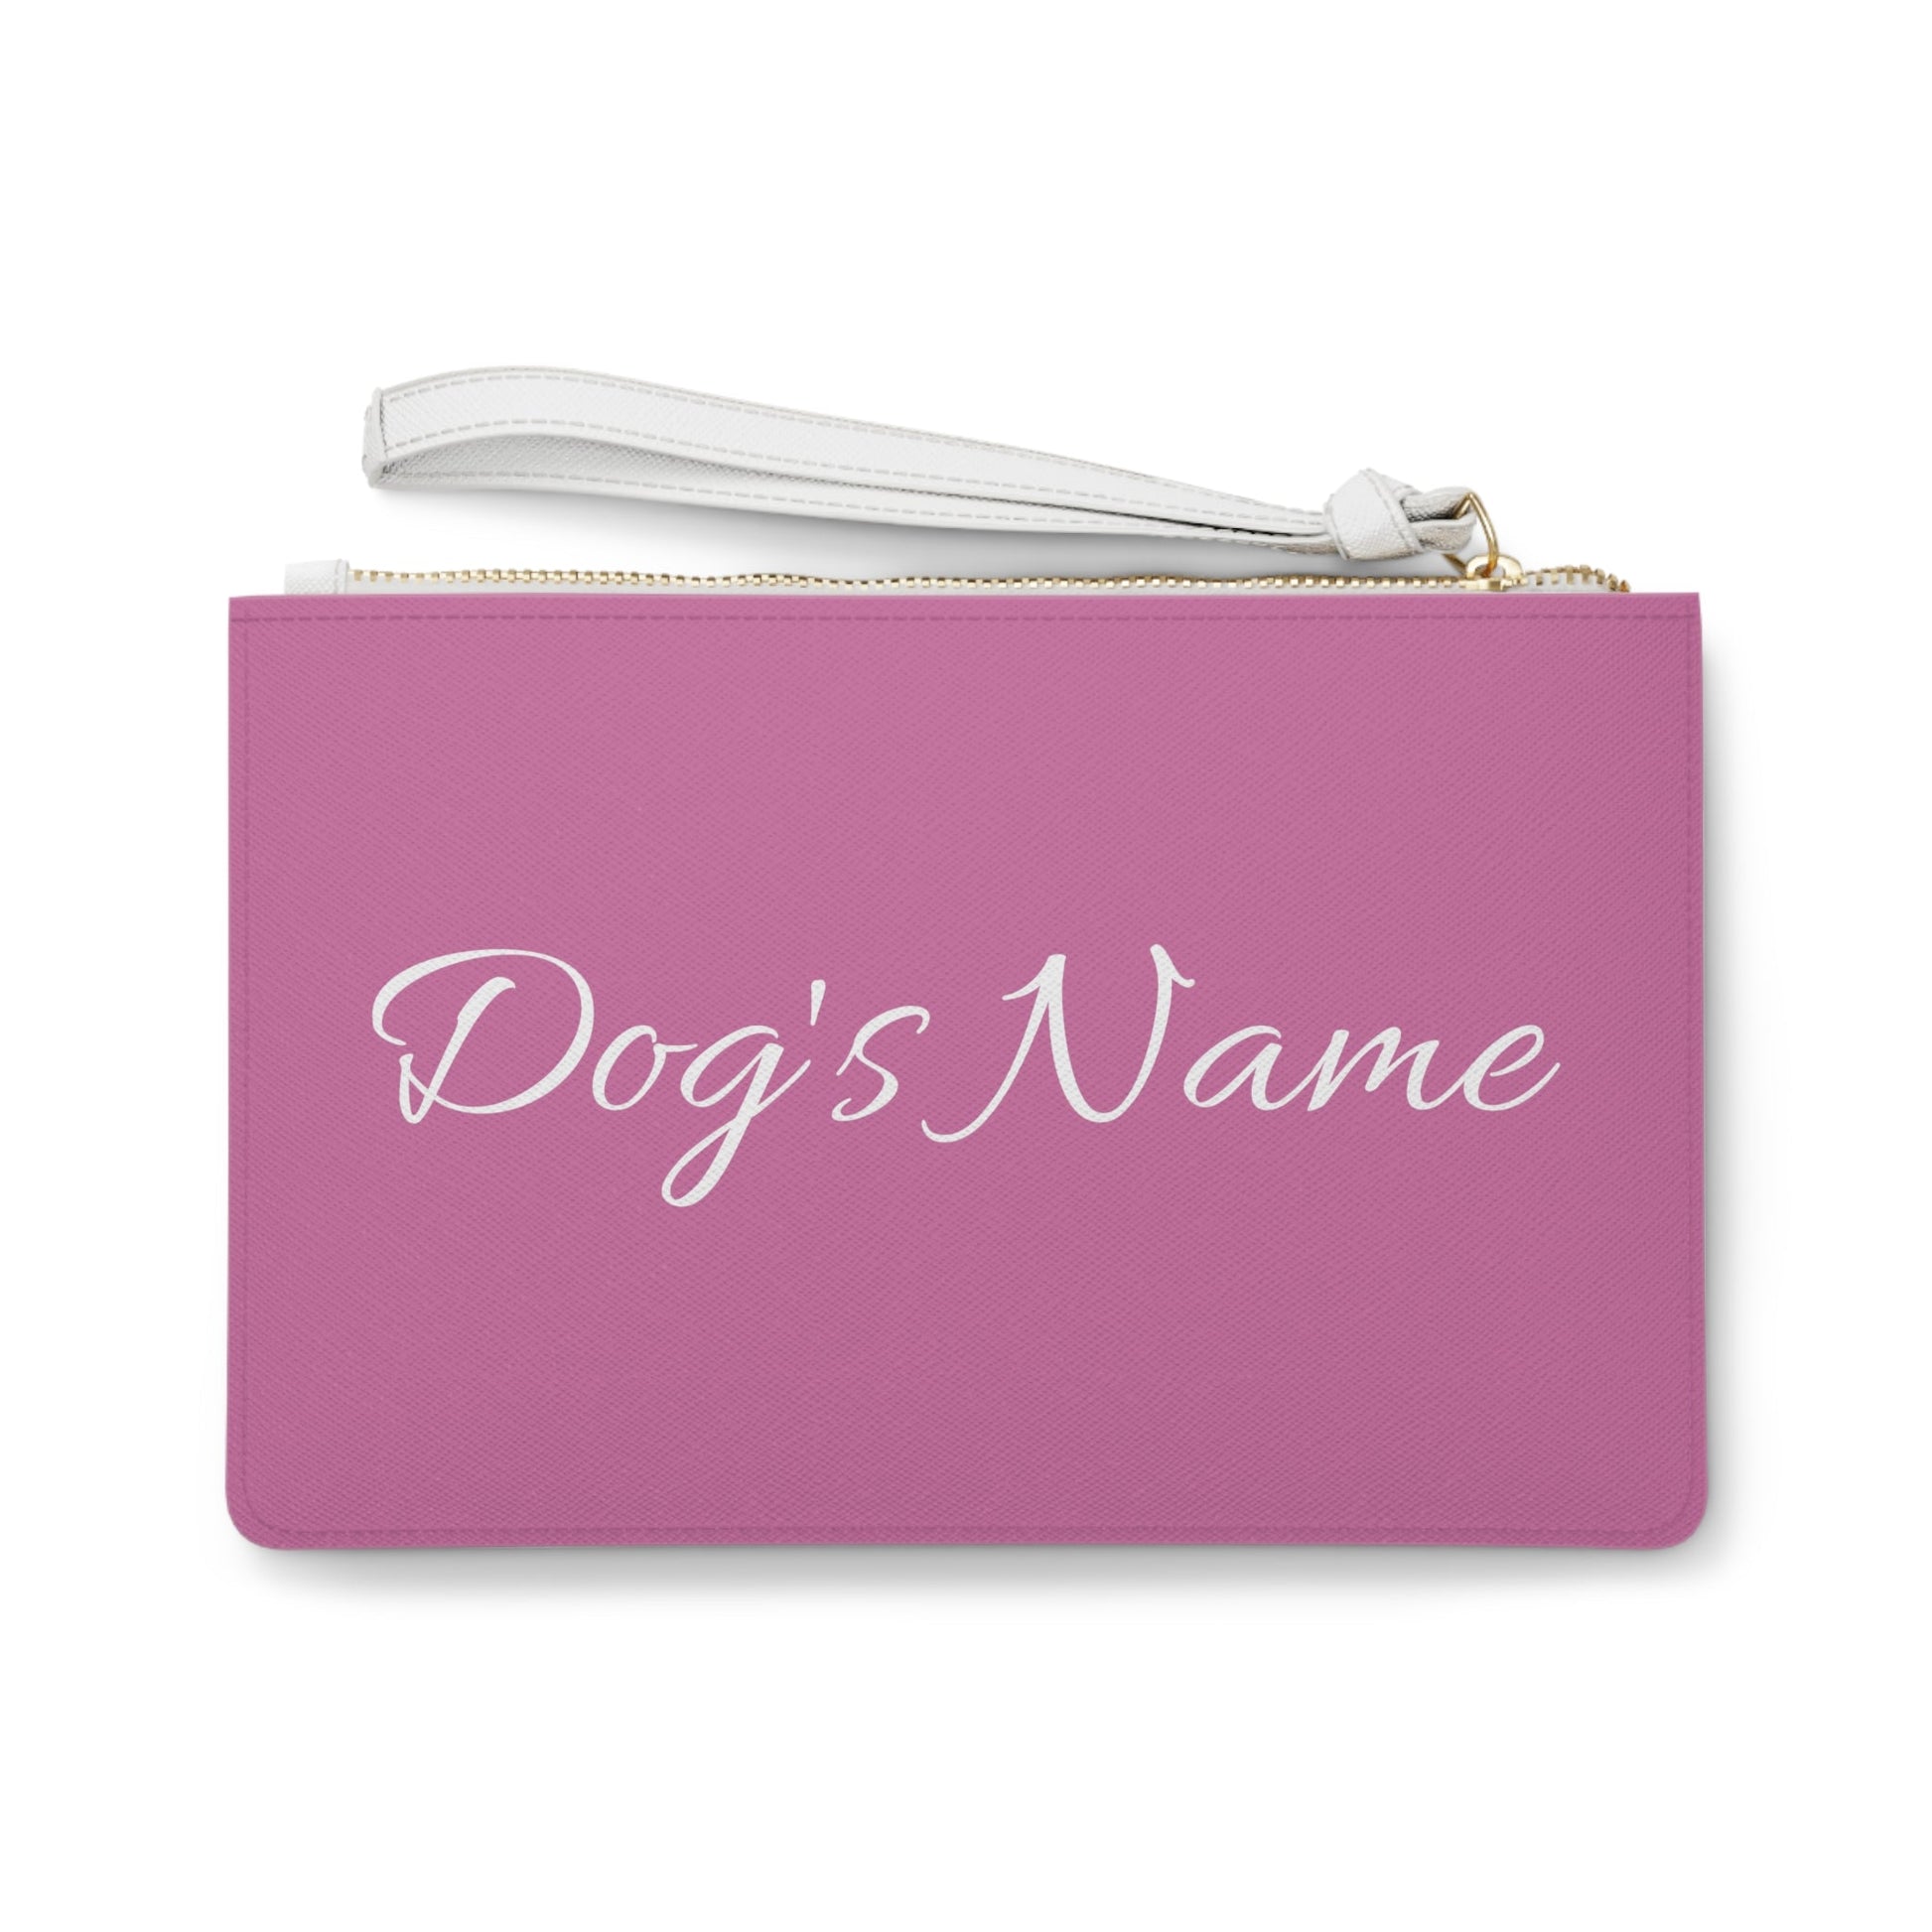 Plays With Dog Clutch - One size Bags